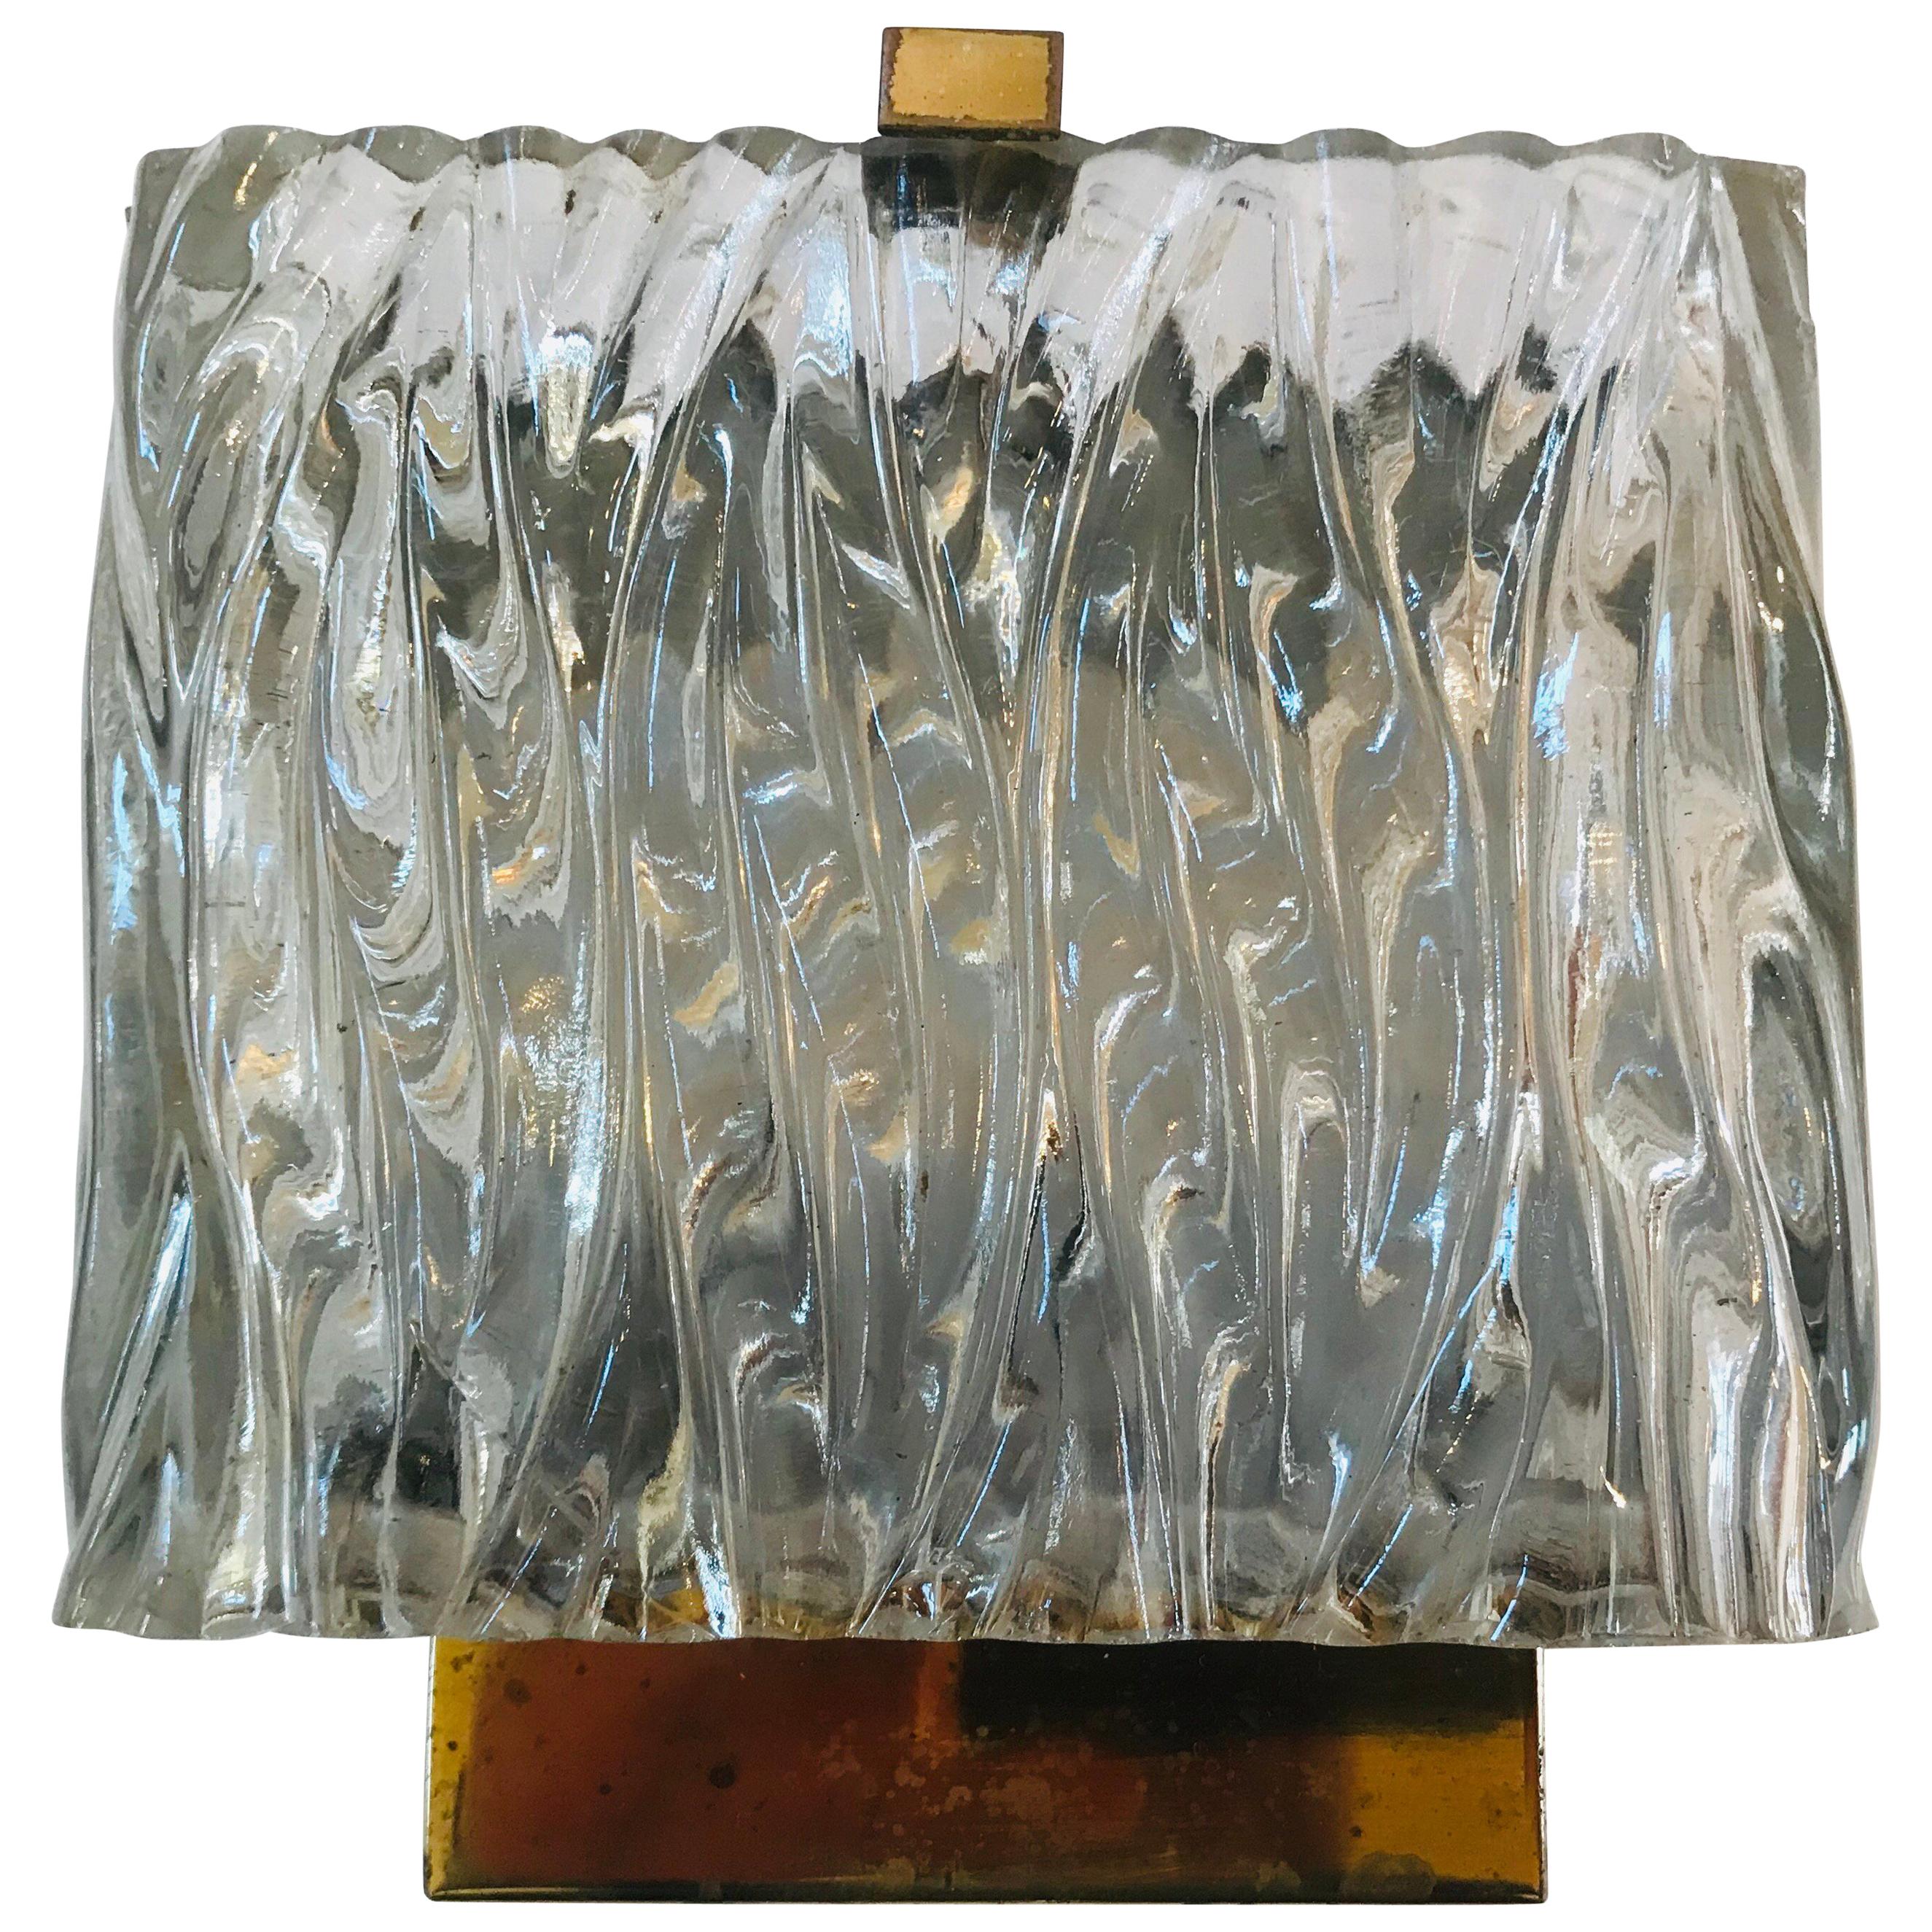 Maison Arlus French 1960s Glass Wall Light